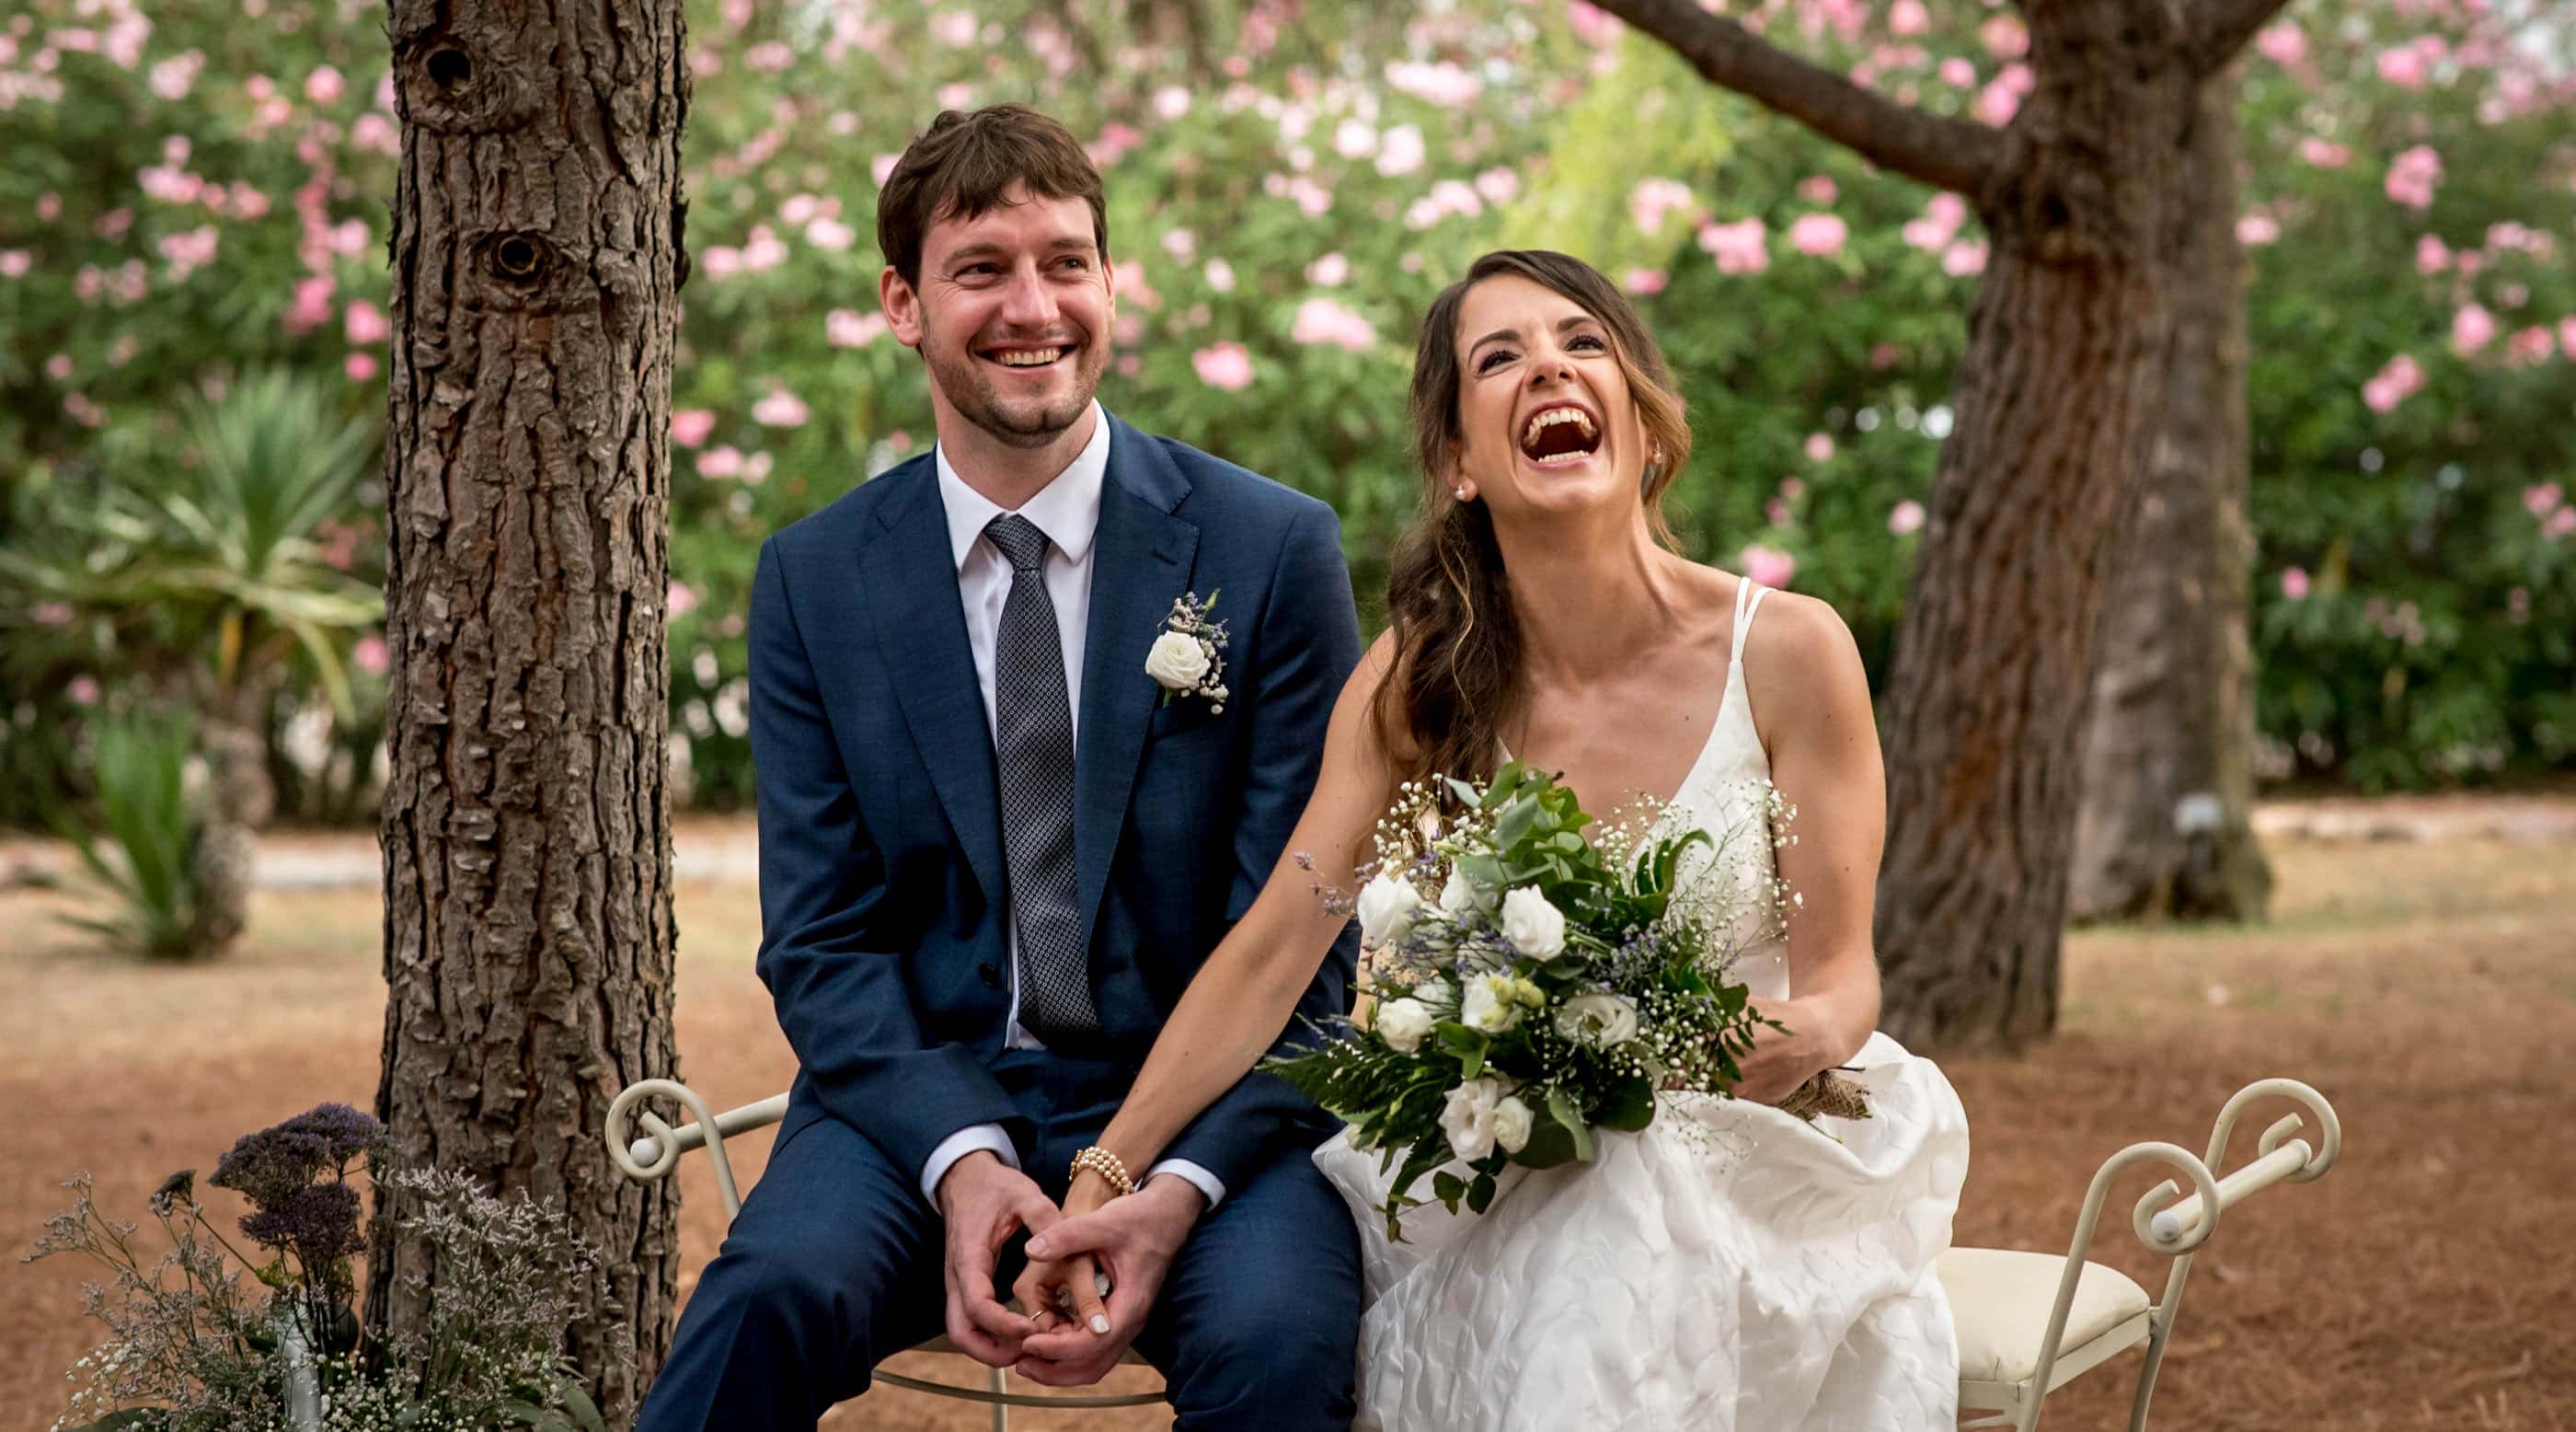 Photo of bride and groom laughing during ceremony captured by London wedding photographer Matt Badenoch